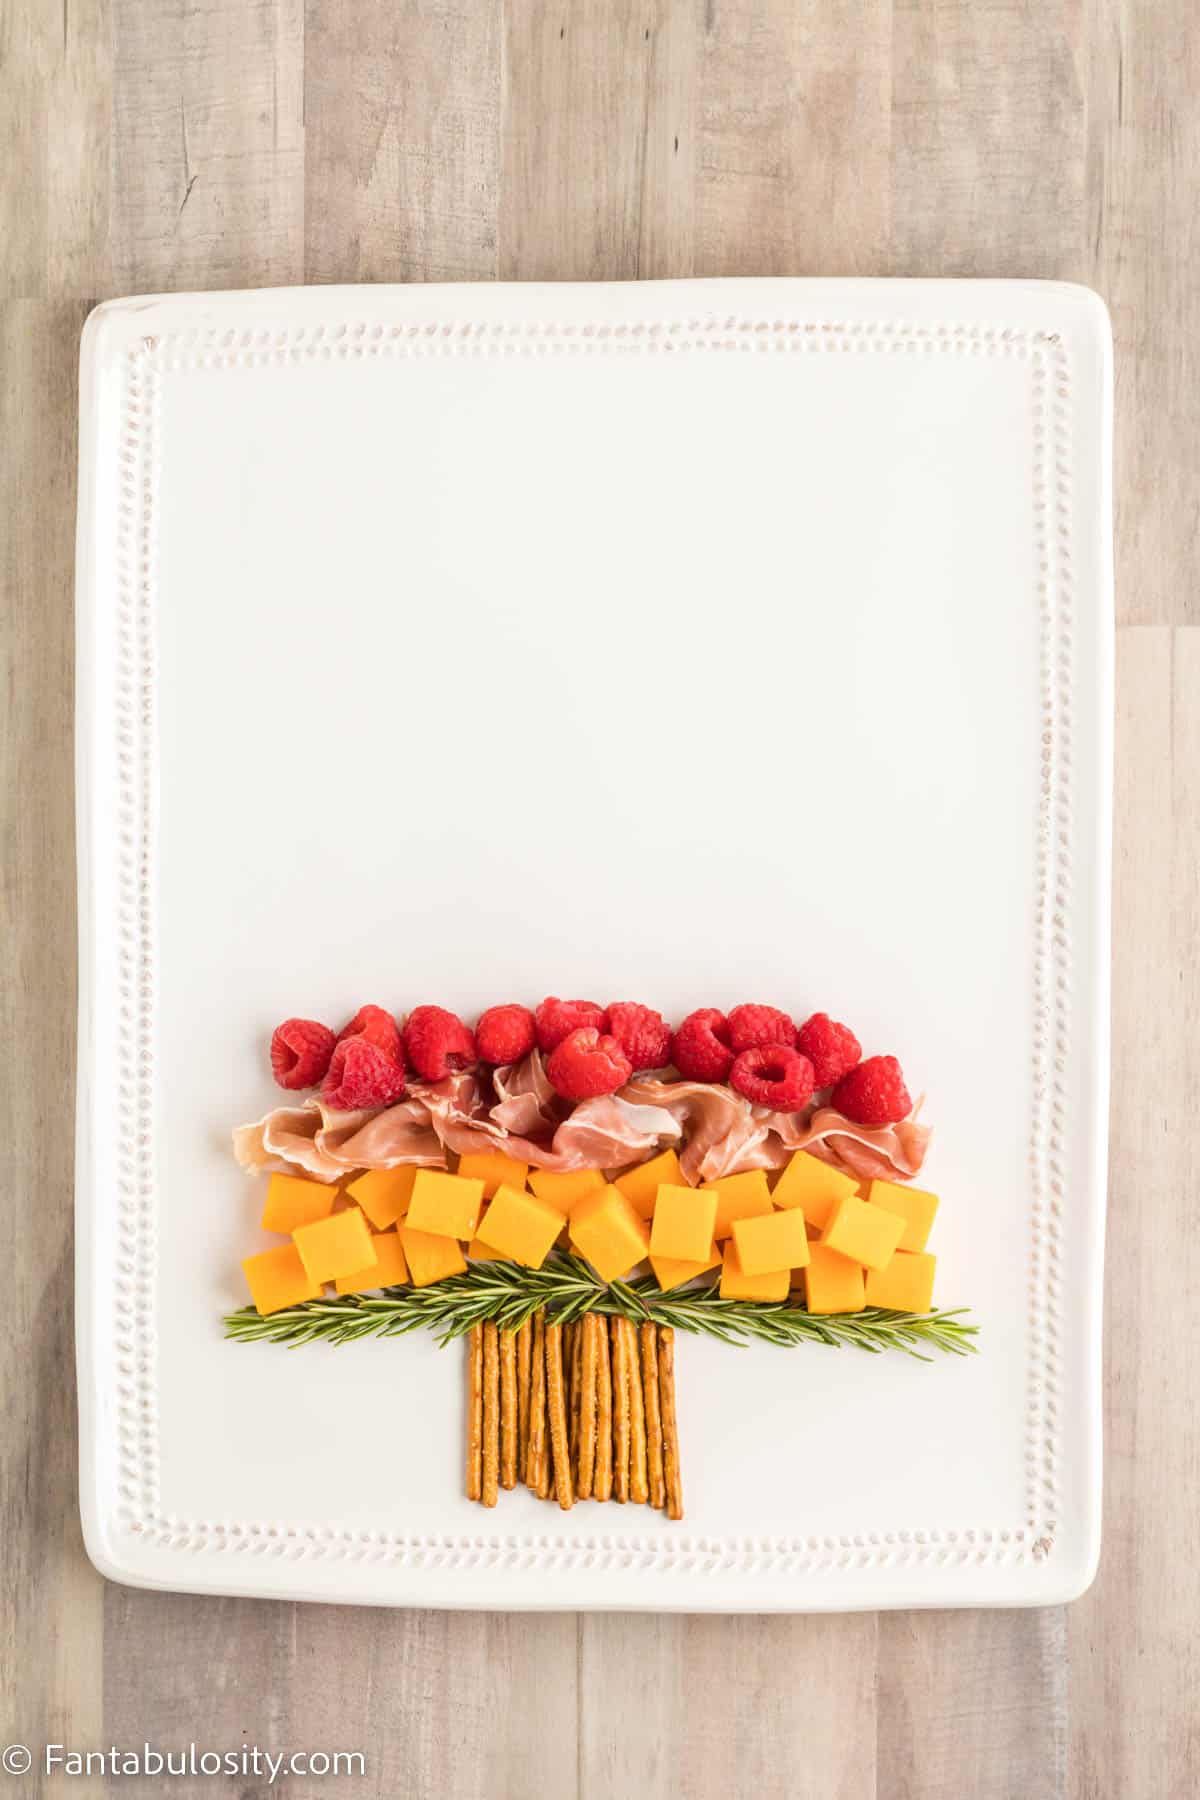 A row of bright red raspberries have been added to continue creating the shape of a Christmas tree on a rectangular white platter